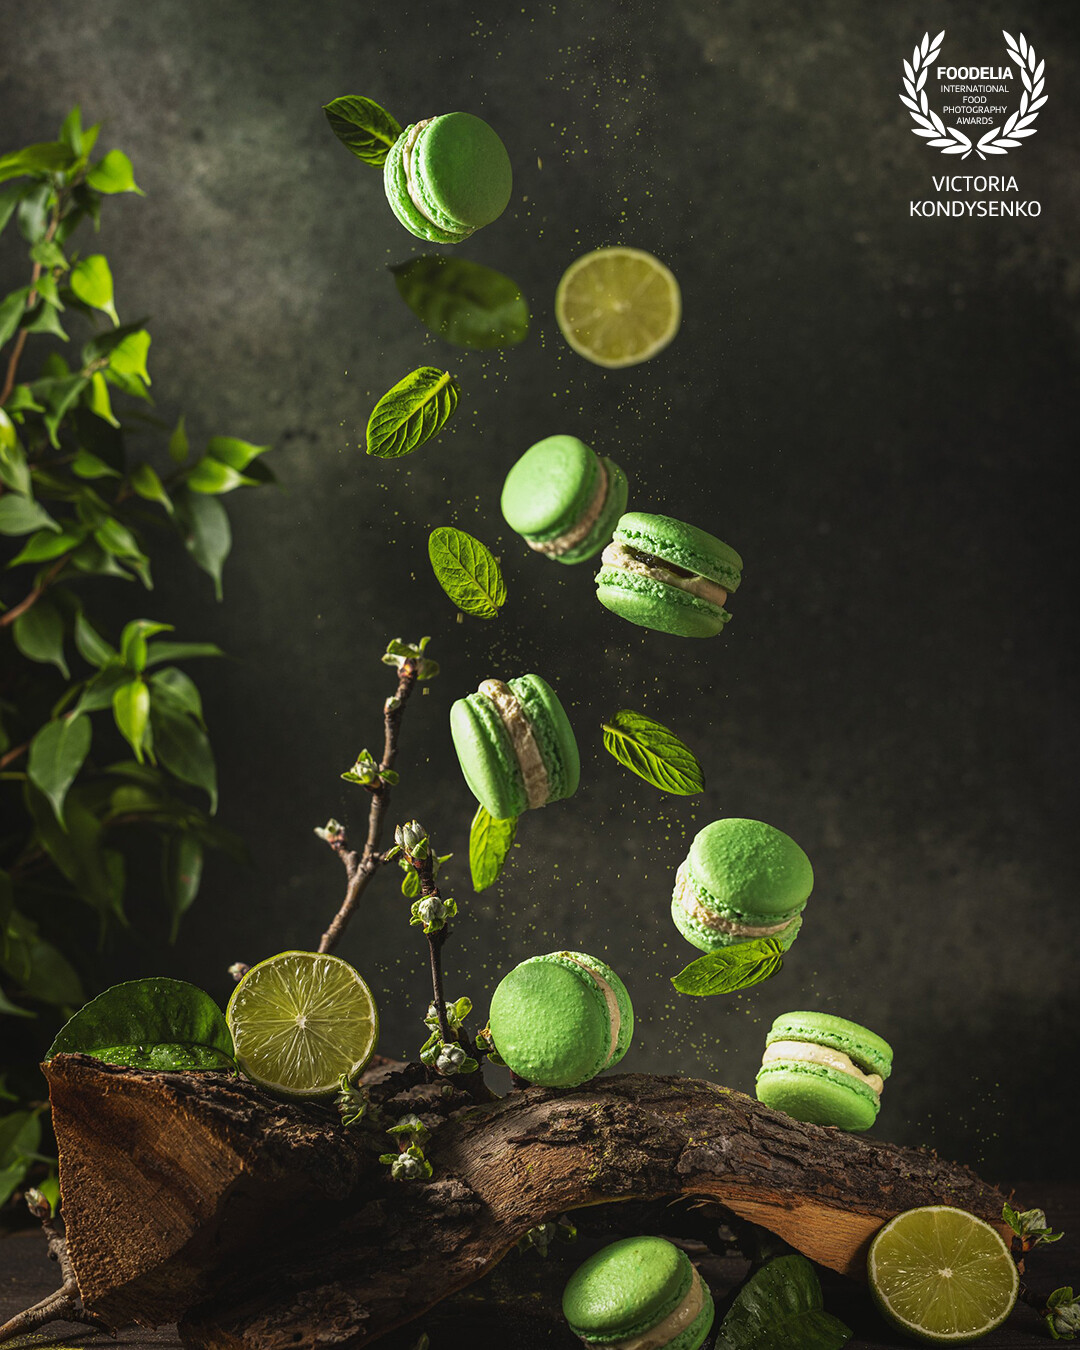 Sweet The Forest Song! Shooting for pâtisserie, sweet macaroons with the taste of mint, lime and matcha tea